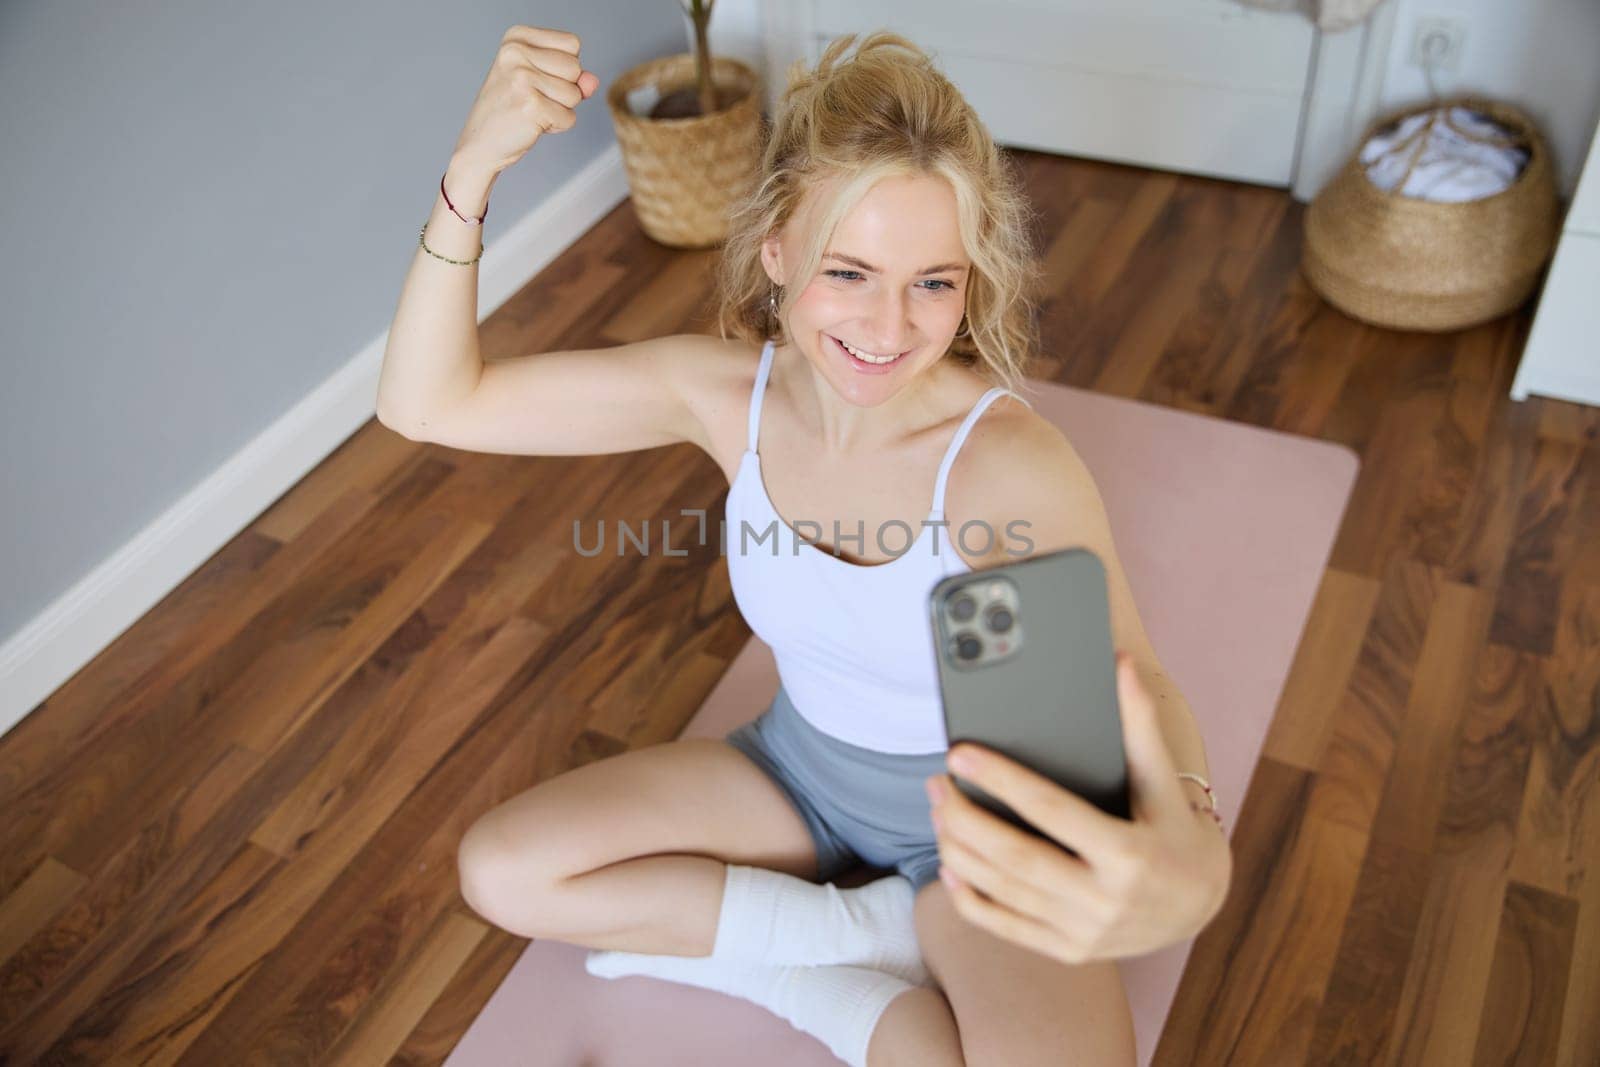 Portrait of blond young woman, fitness training, sitting on yoga mat, taking selfies during workout at home, showing muscles, flexing biceps.